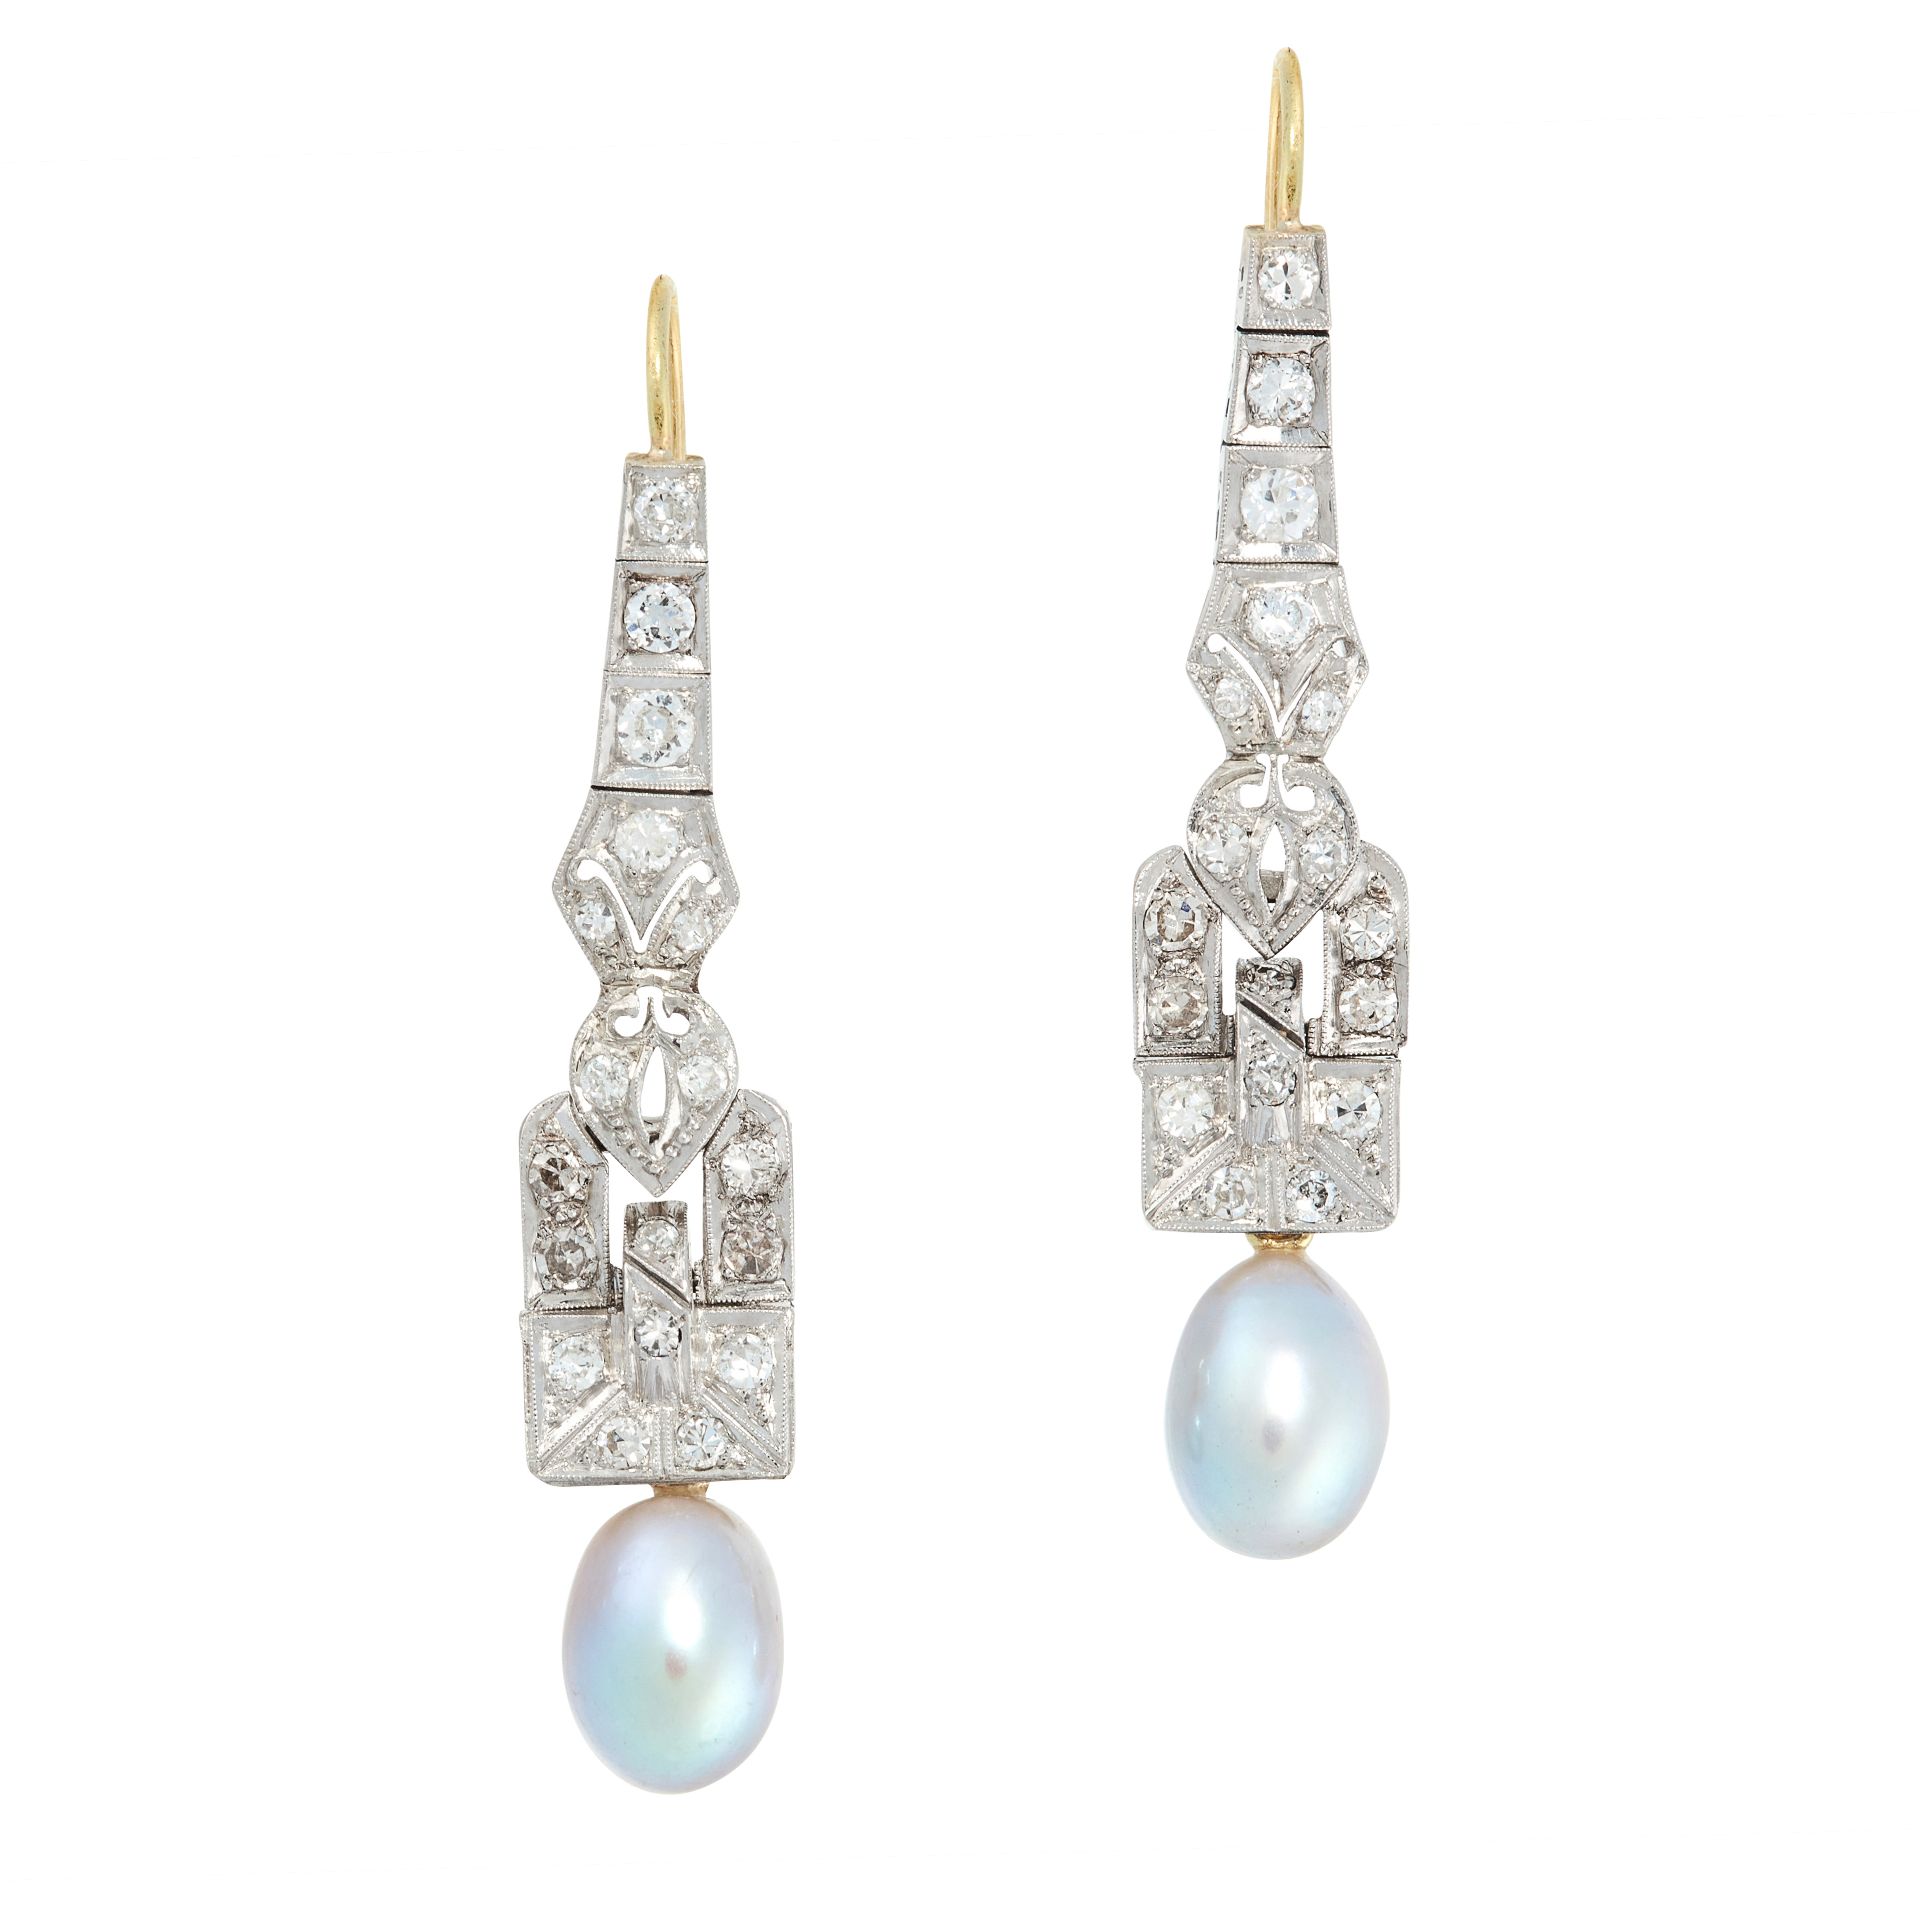 A PAIR OF ART DECO PEARL AND DIAMOND EARRINGS, EARLY 20TH CENTURY in platinum and yellow gold, the